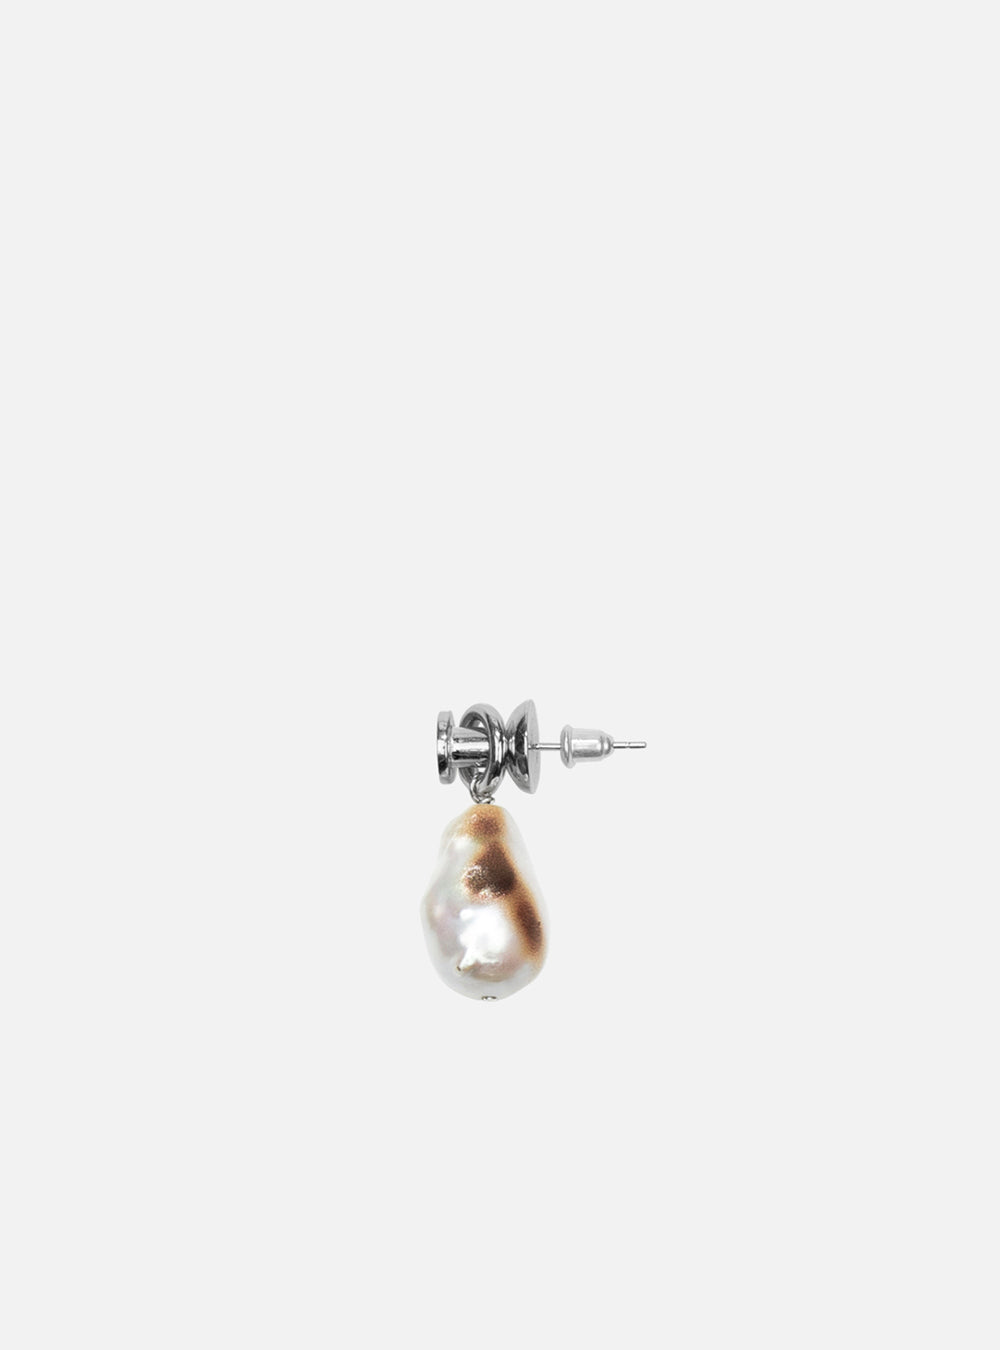 A Burnt baroque pearl with push-pin earring by MIDNIGHTFACTORY on a white surface.